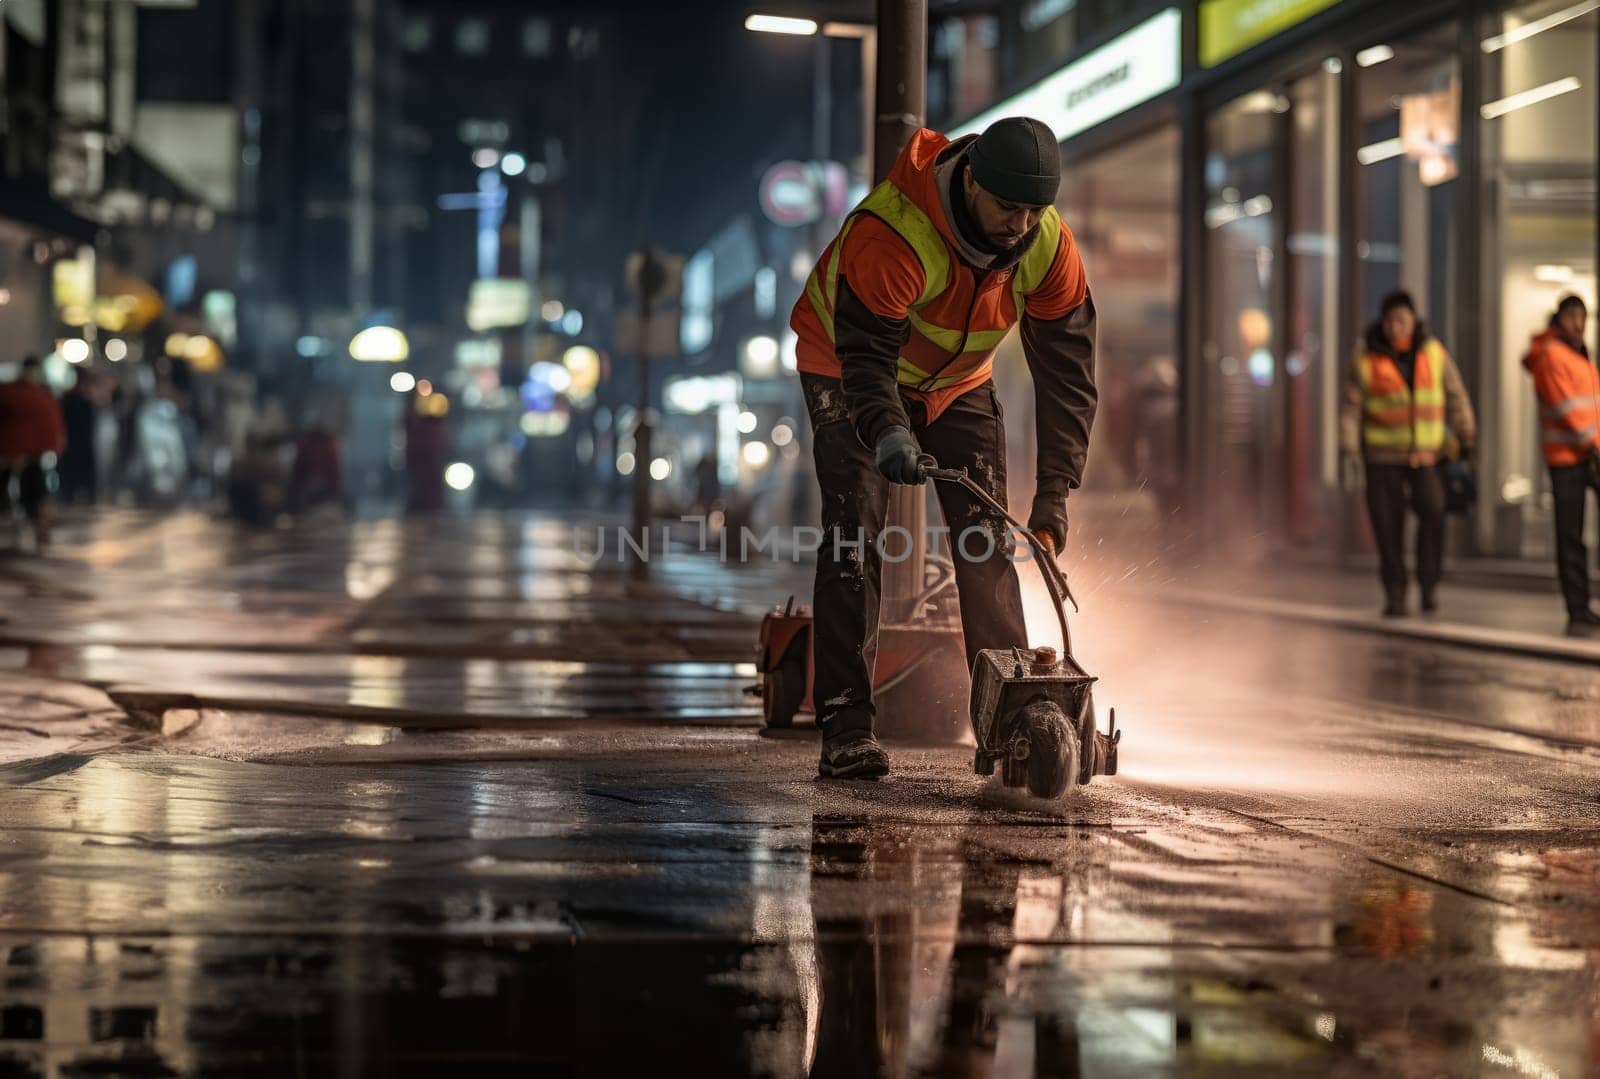 In the early hours of the morning, dedicated street cleaners diligently prepare the city for a fresh day, ensuring cleanliness and tidiness for all residents and visitors